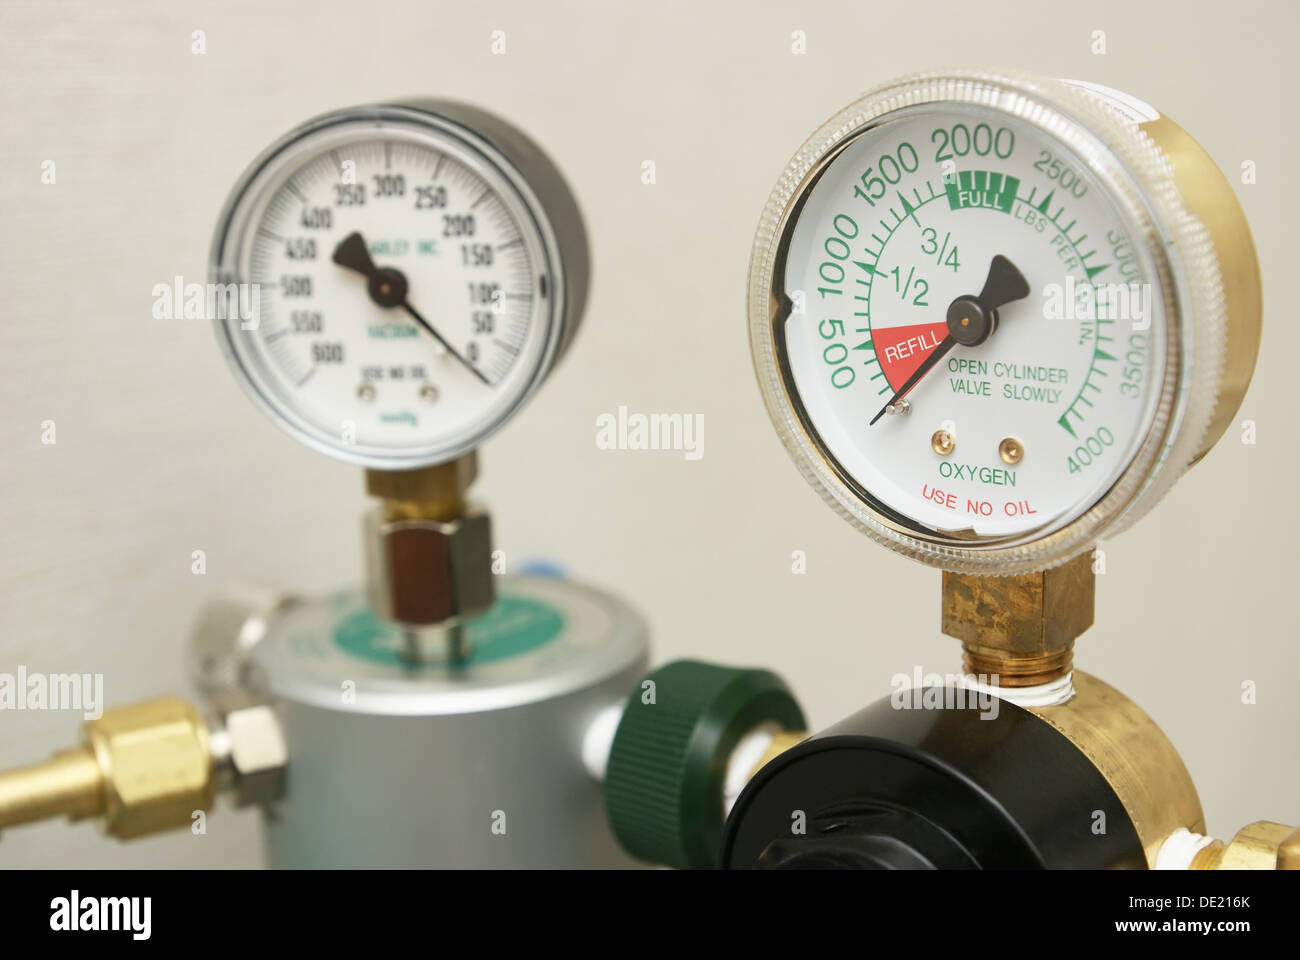 Oxygen in tank exhausted and indicated on gages to refill Stock Photo